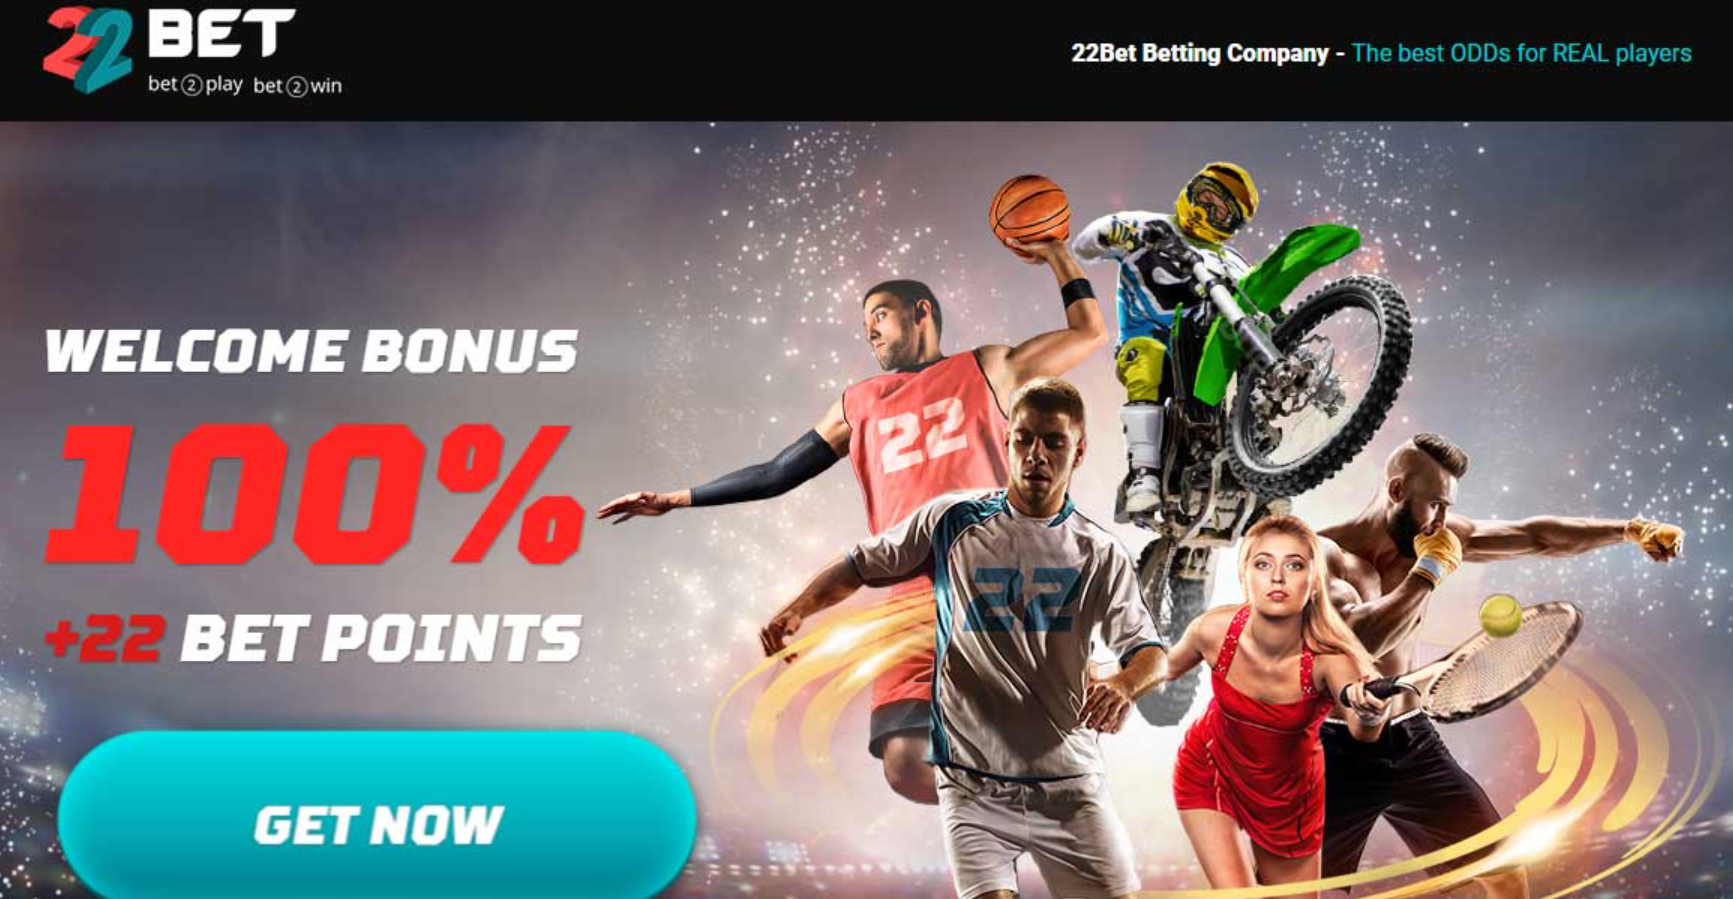 How to register and make a deposit to earn, receive and use 22Bet bonuses?